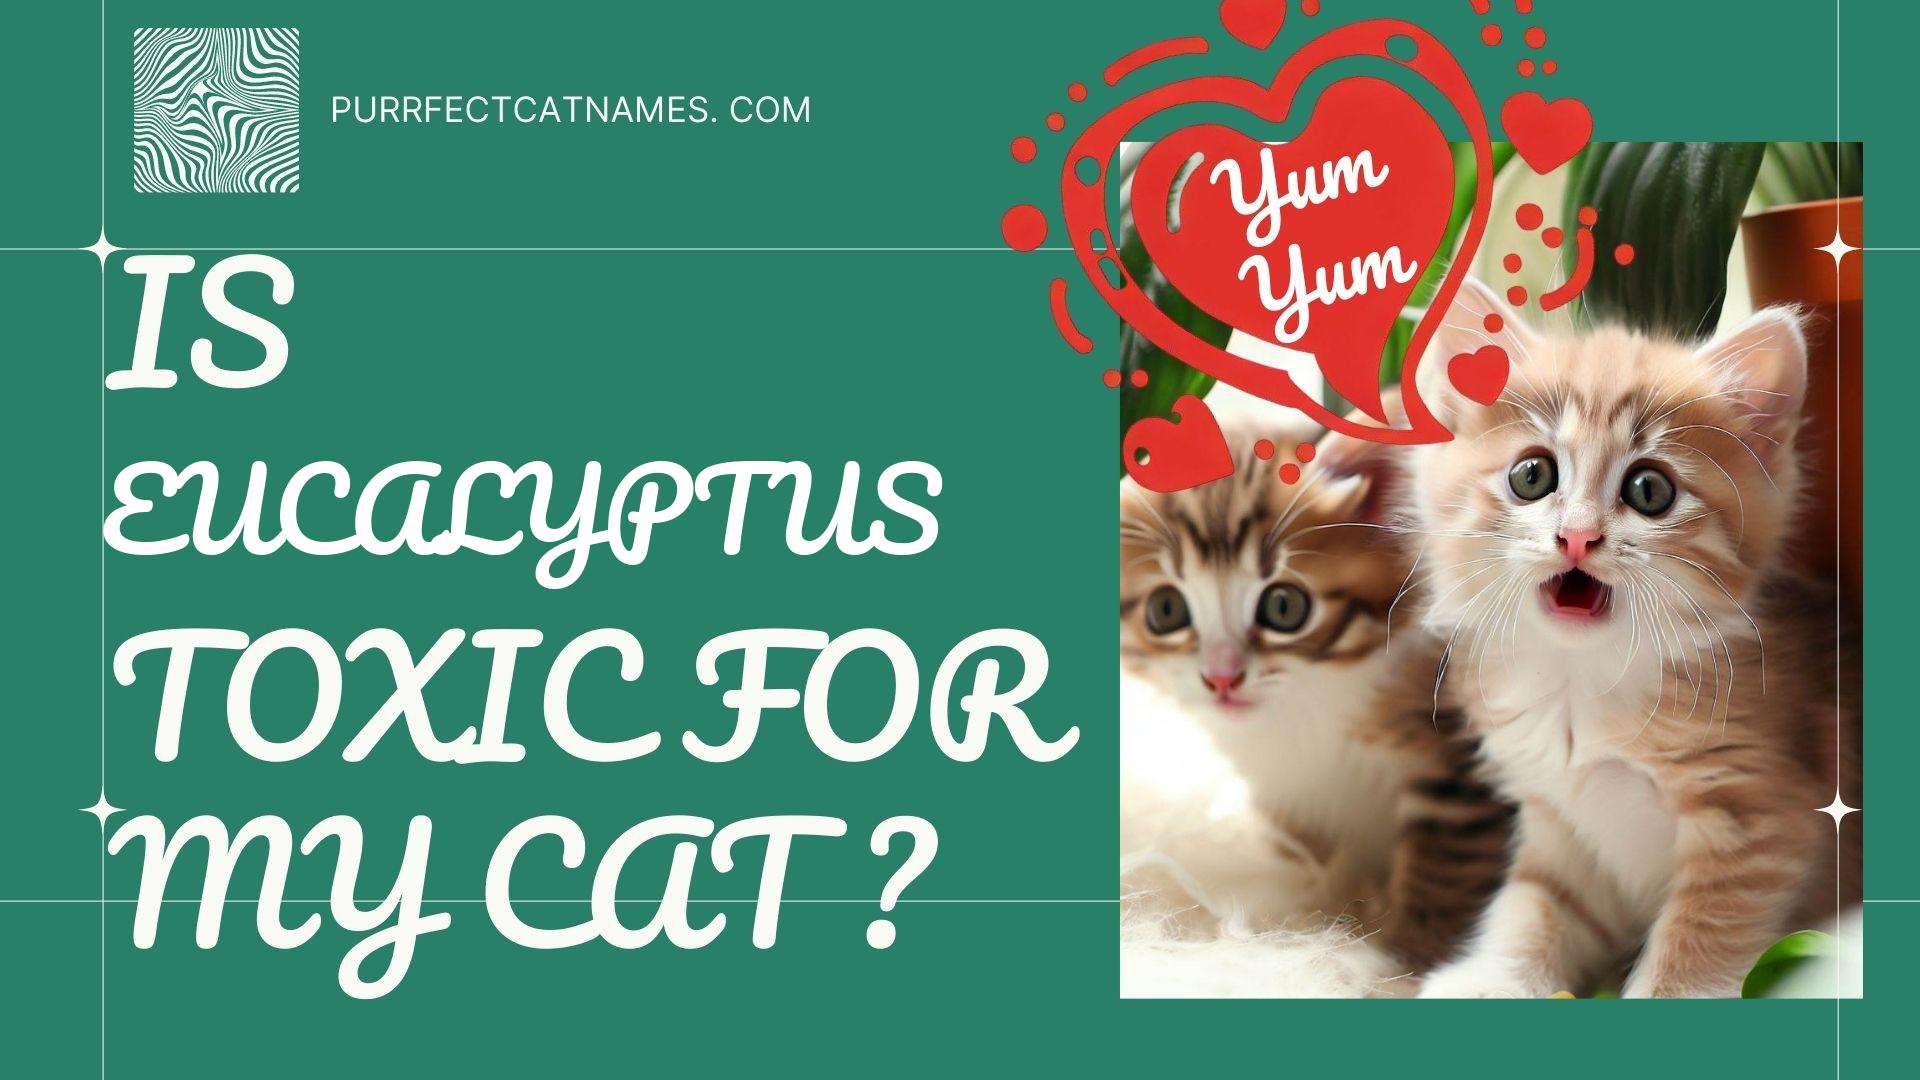 IsEucalyptus plant toxic for your cat